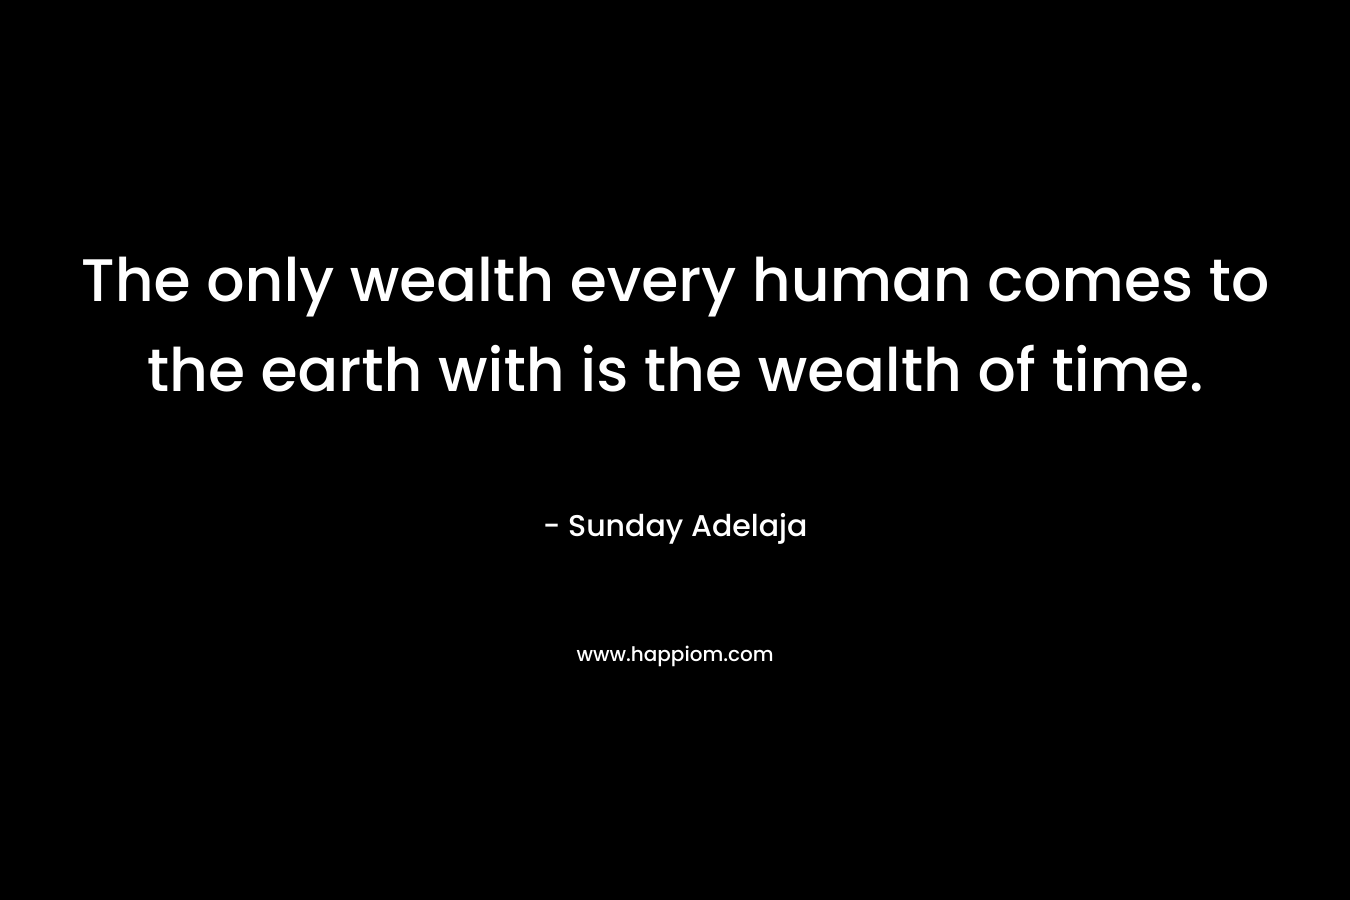 The only wealth every human comes to the earth with is the wealth of time.